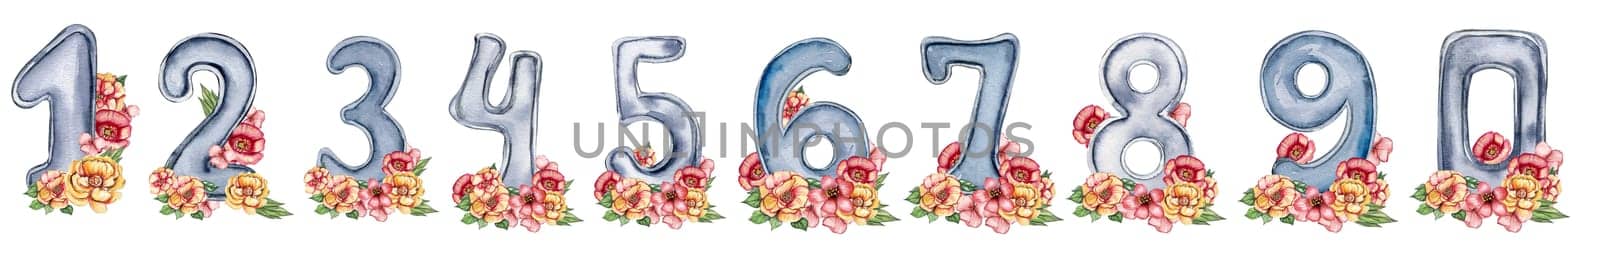 Watercolor hand drawn numbers and flowers composition. Illustration of a numbers. Perfect for scrapbooking, kids design, wedding invitation, posters, greetings cards, party decoration.